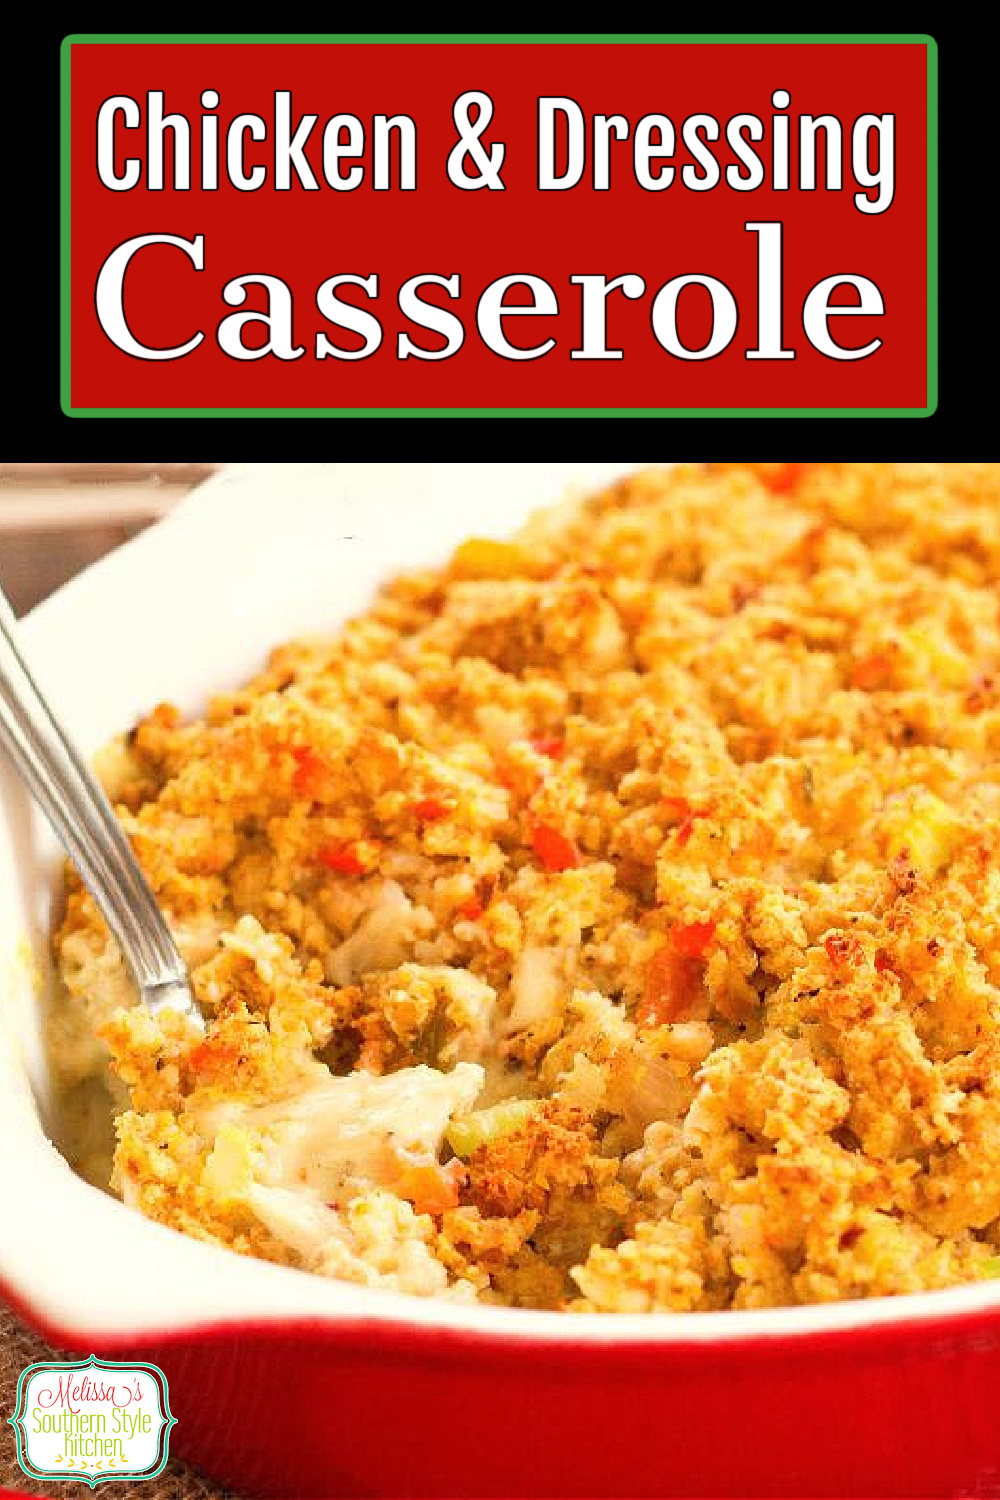 Serve this Chicken and Dressing Casserole with a heaping helping of mashed potatoes for a down home feast any night of the week #chickenanddressing #easychickenrecipes #chickencasserole #cornbreaddresing #dressingrecipes #southerncornbreadressing #thansgivingrecipes #chickencasserolerecipes via @melissasssk